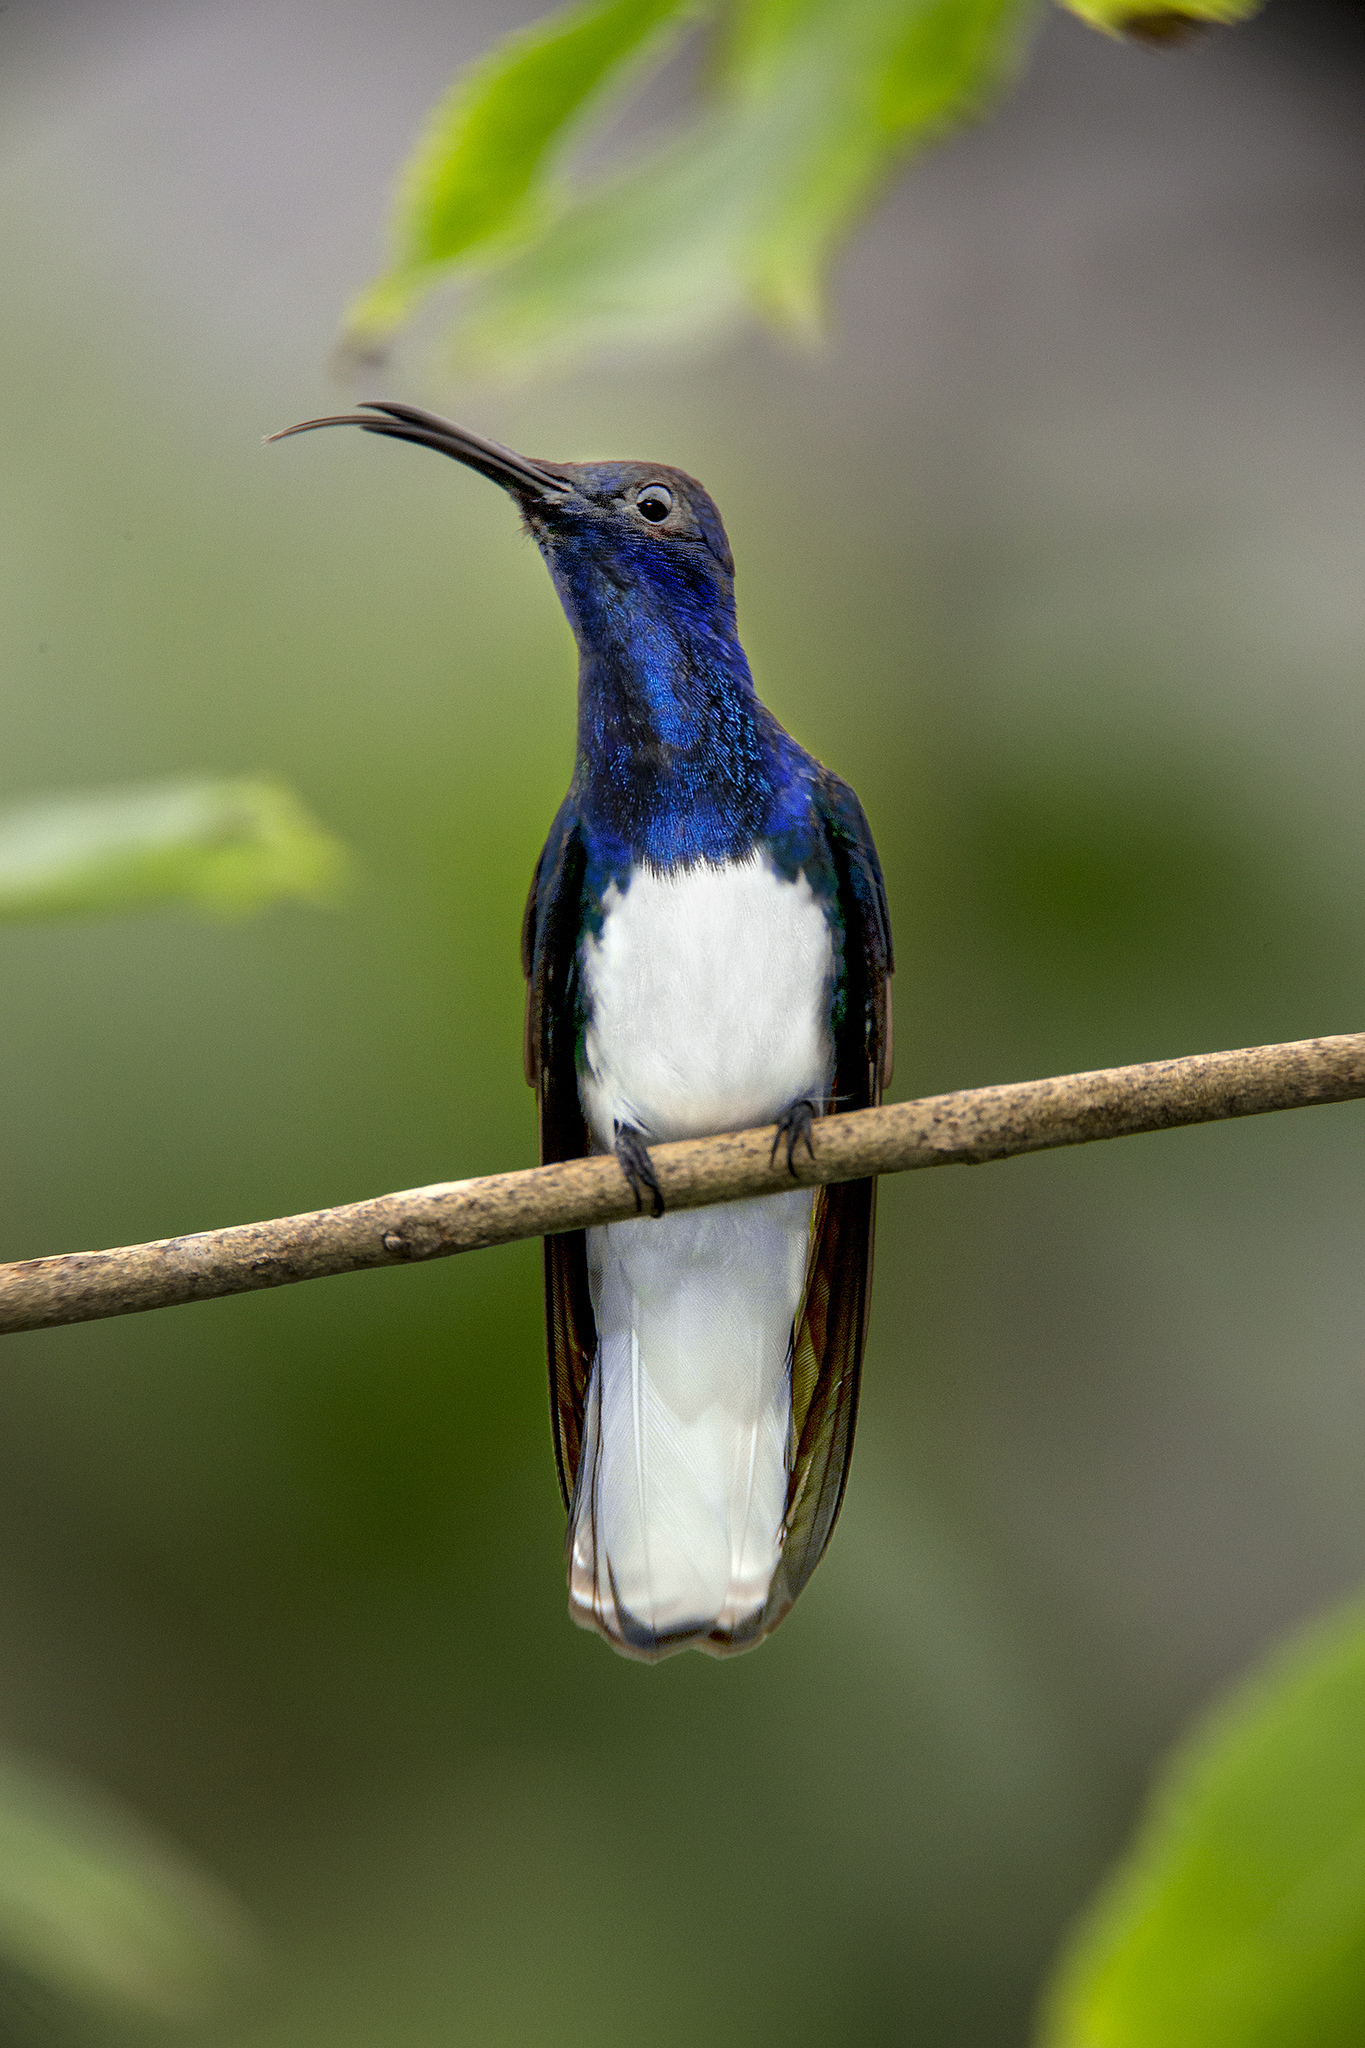 Blue hummingbird with white chest sticking out tongue